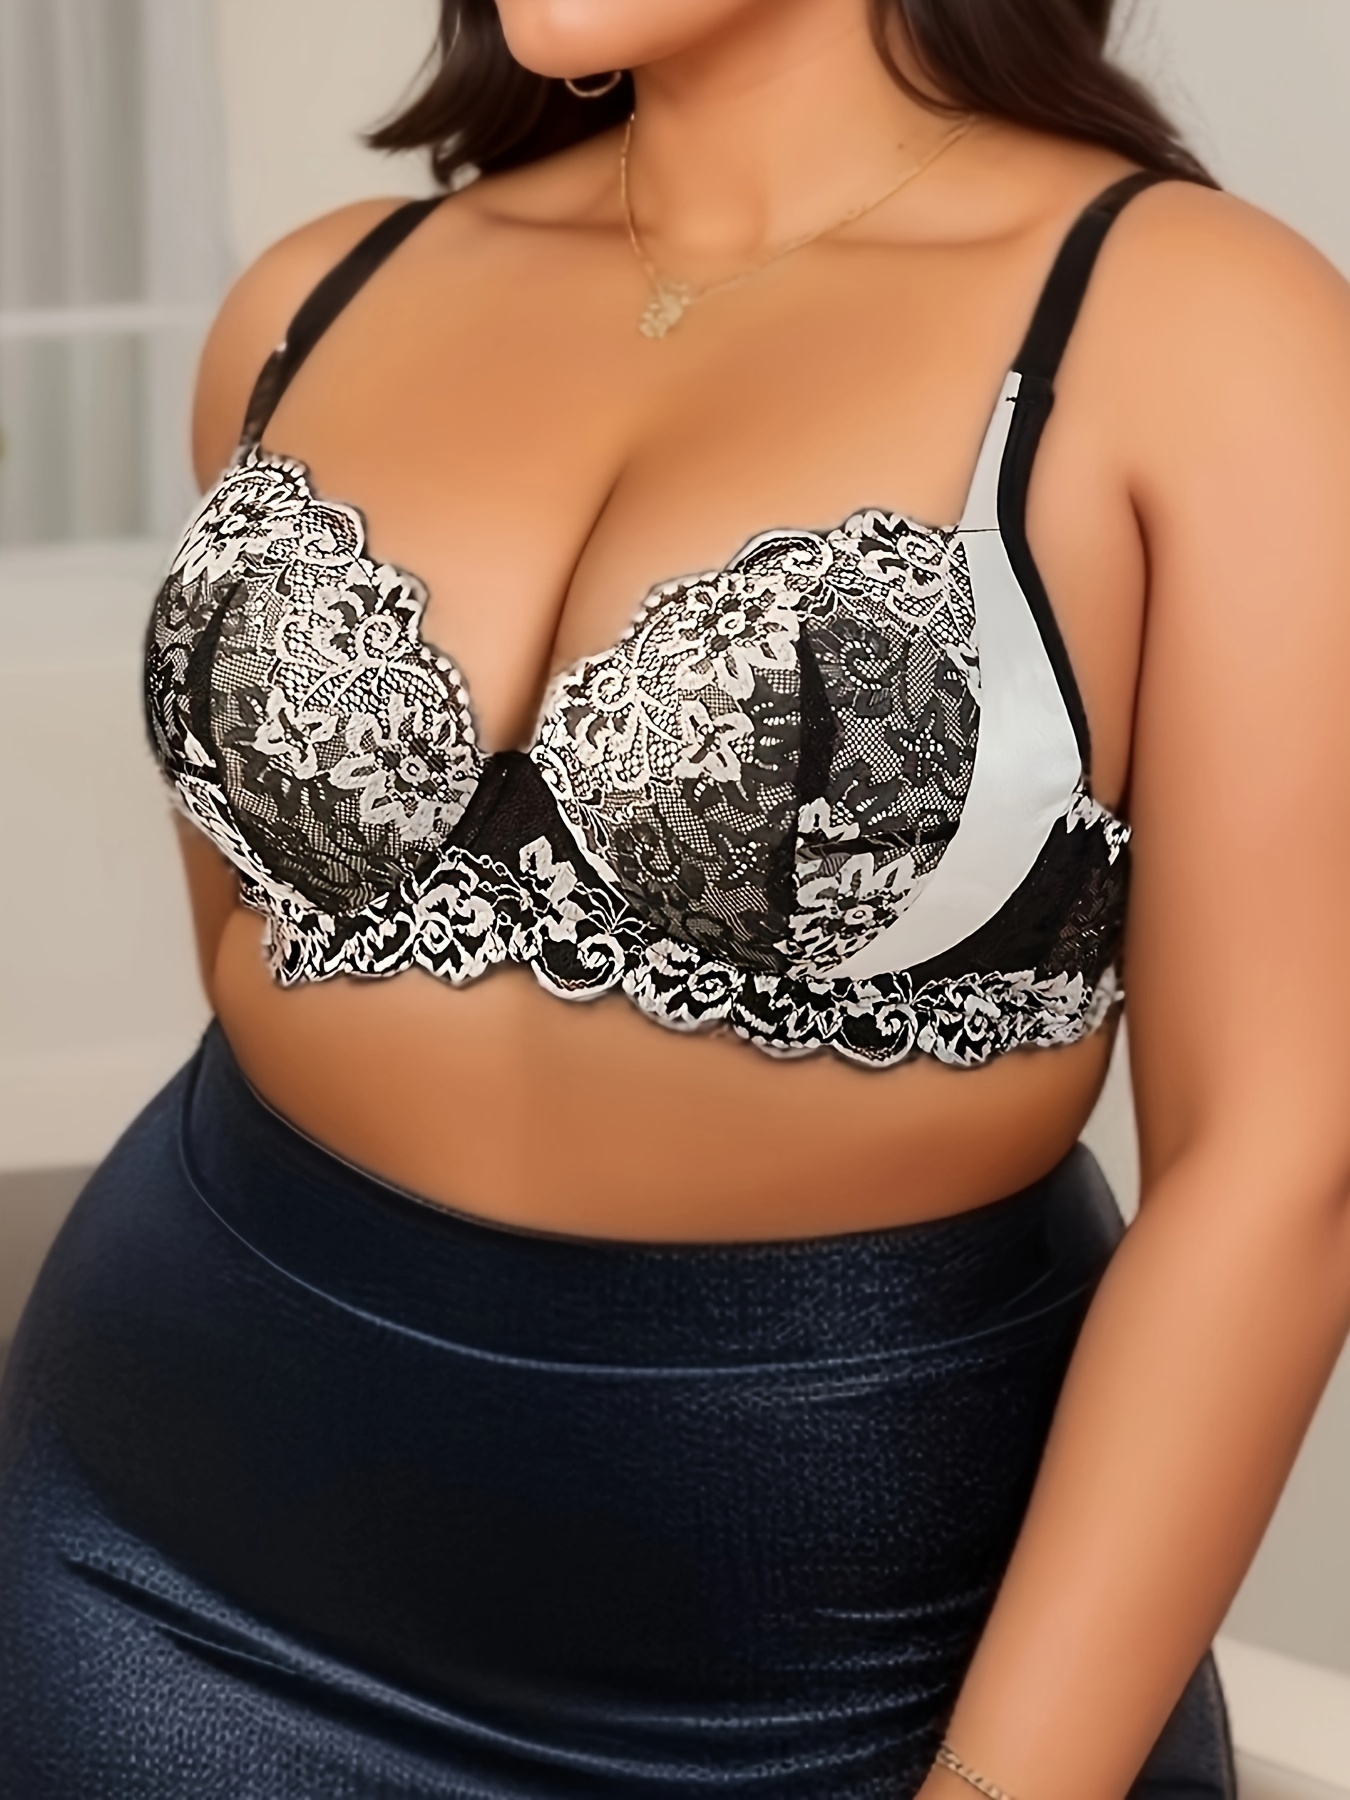 Women Embroidery Lingerie Push up Padded Bras Floral Underwire